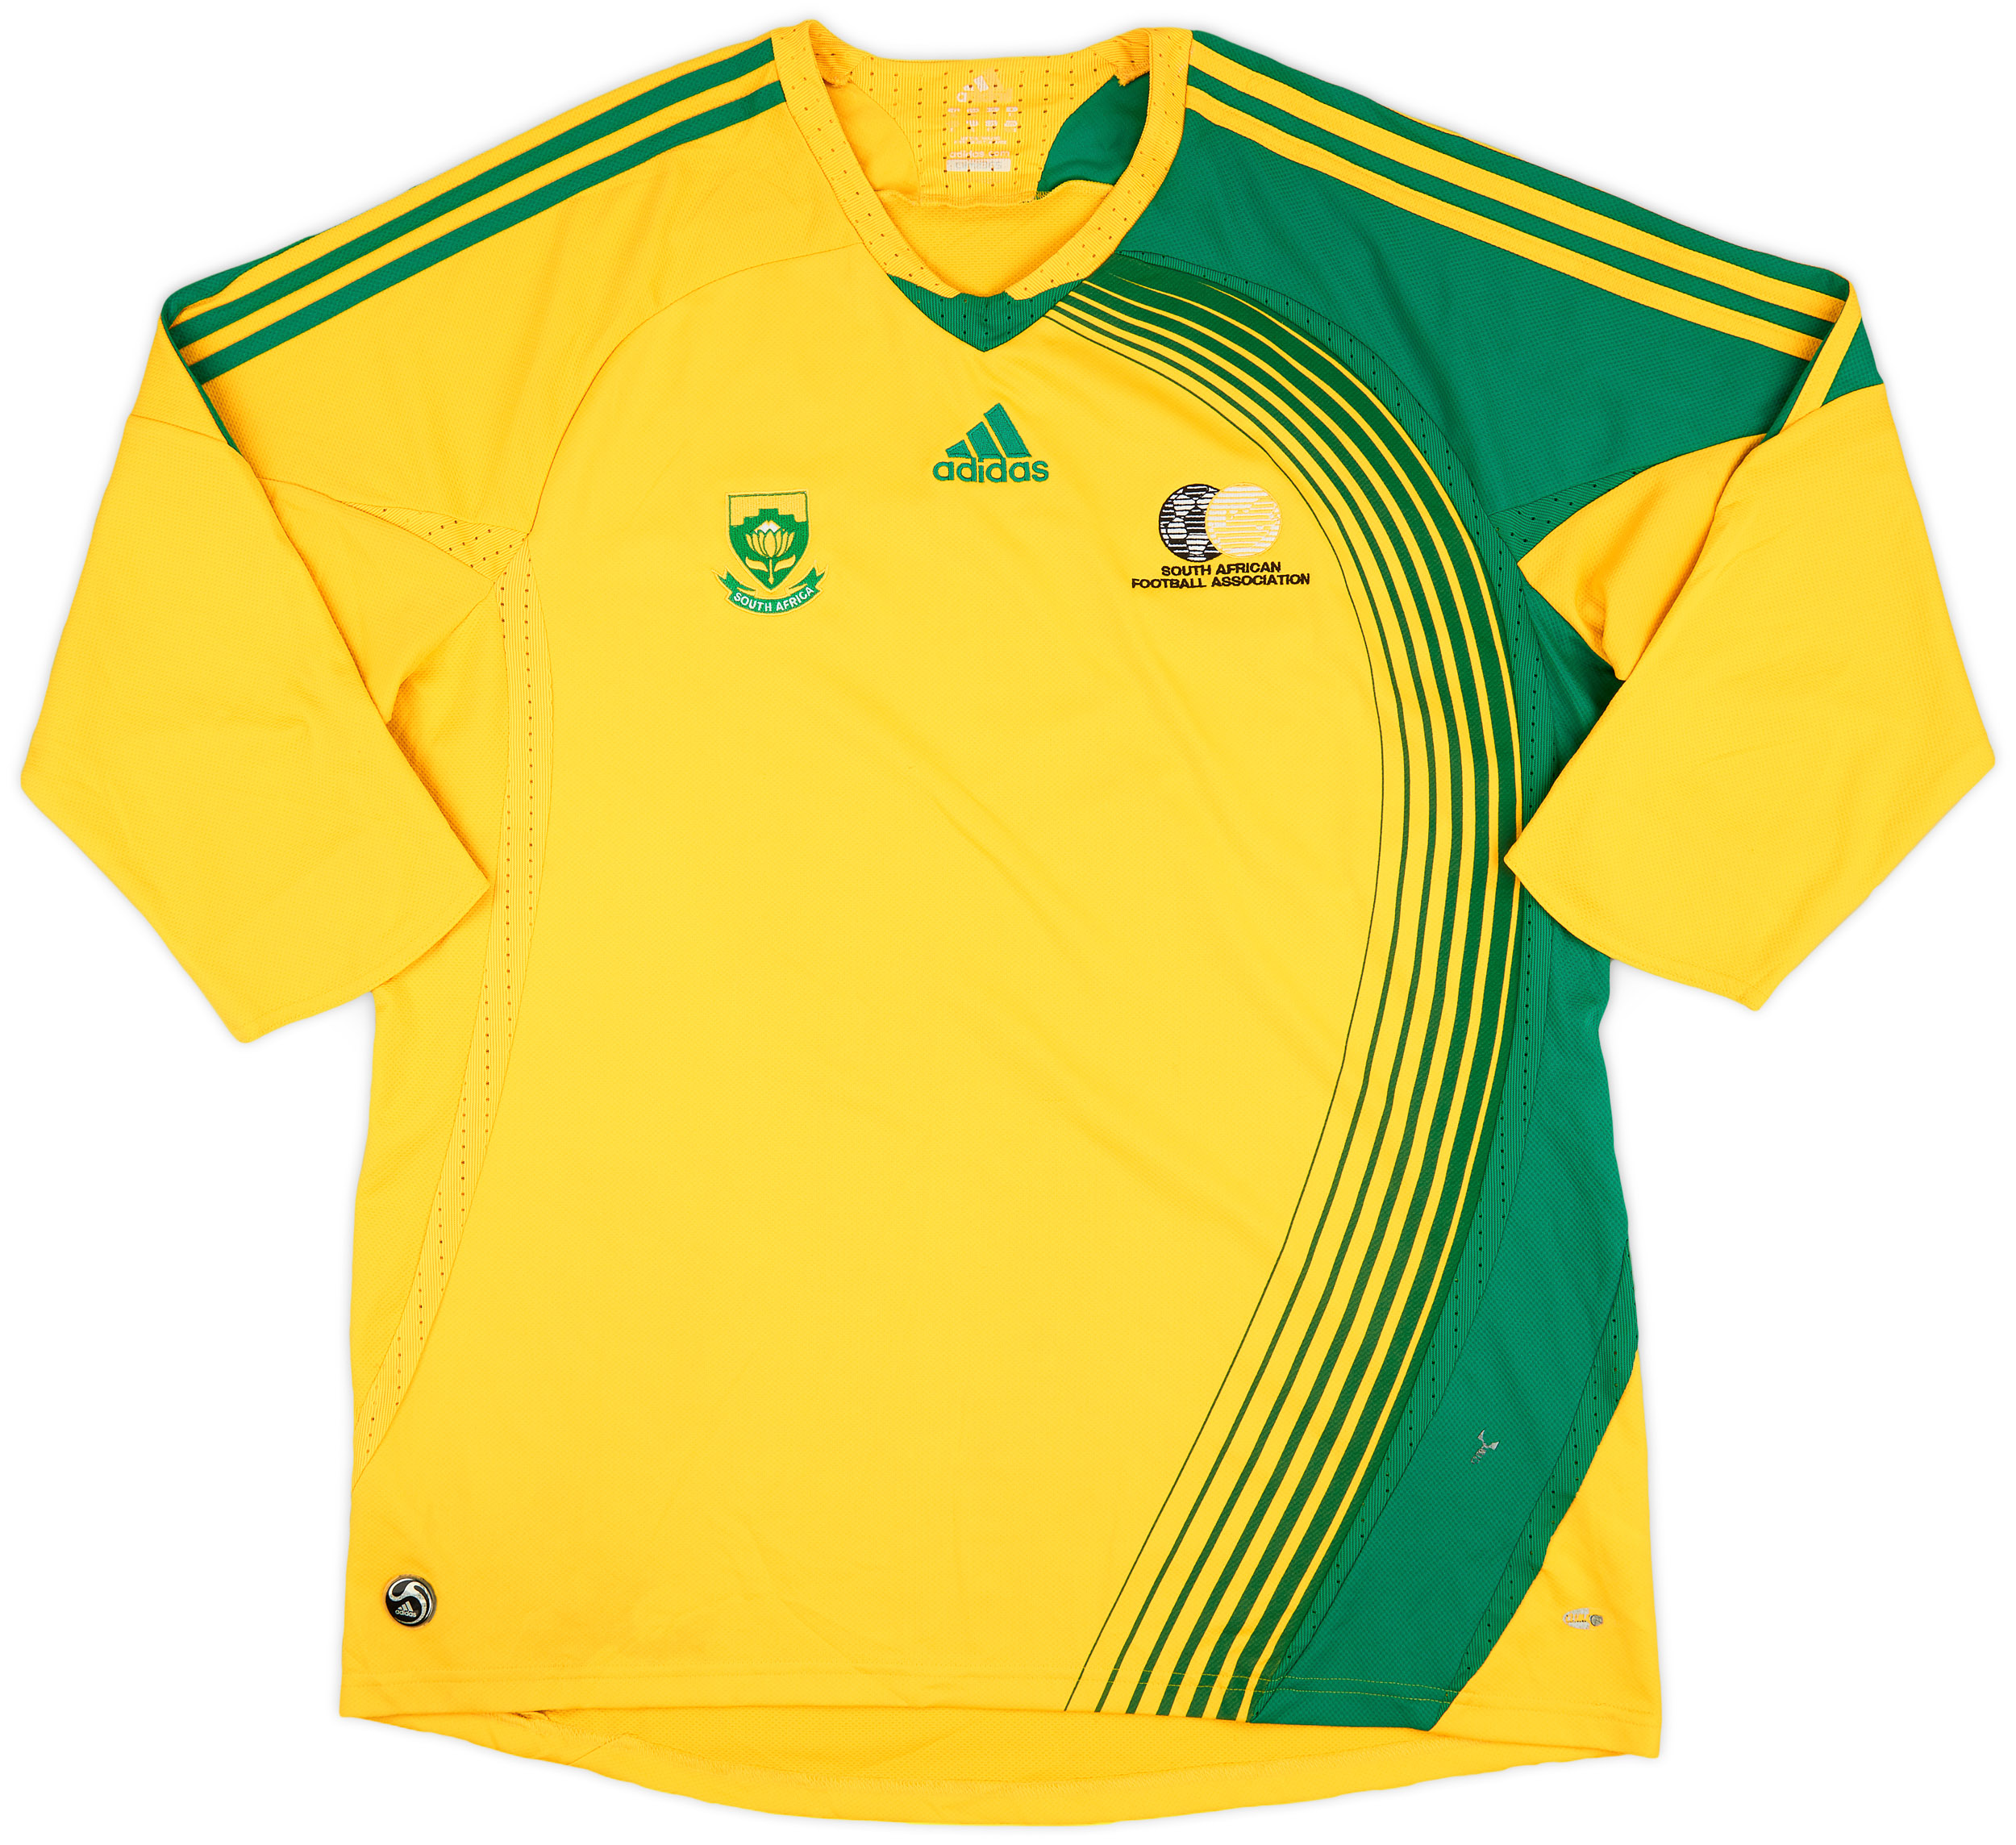 2007-09 South Africa Home Shirt - 7/10 - ()